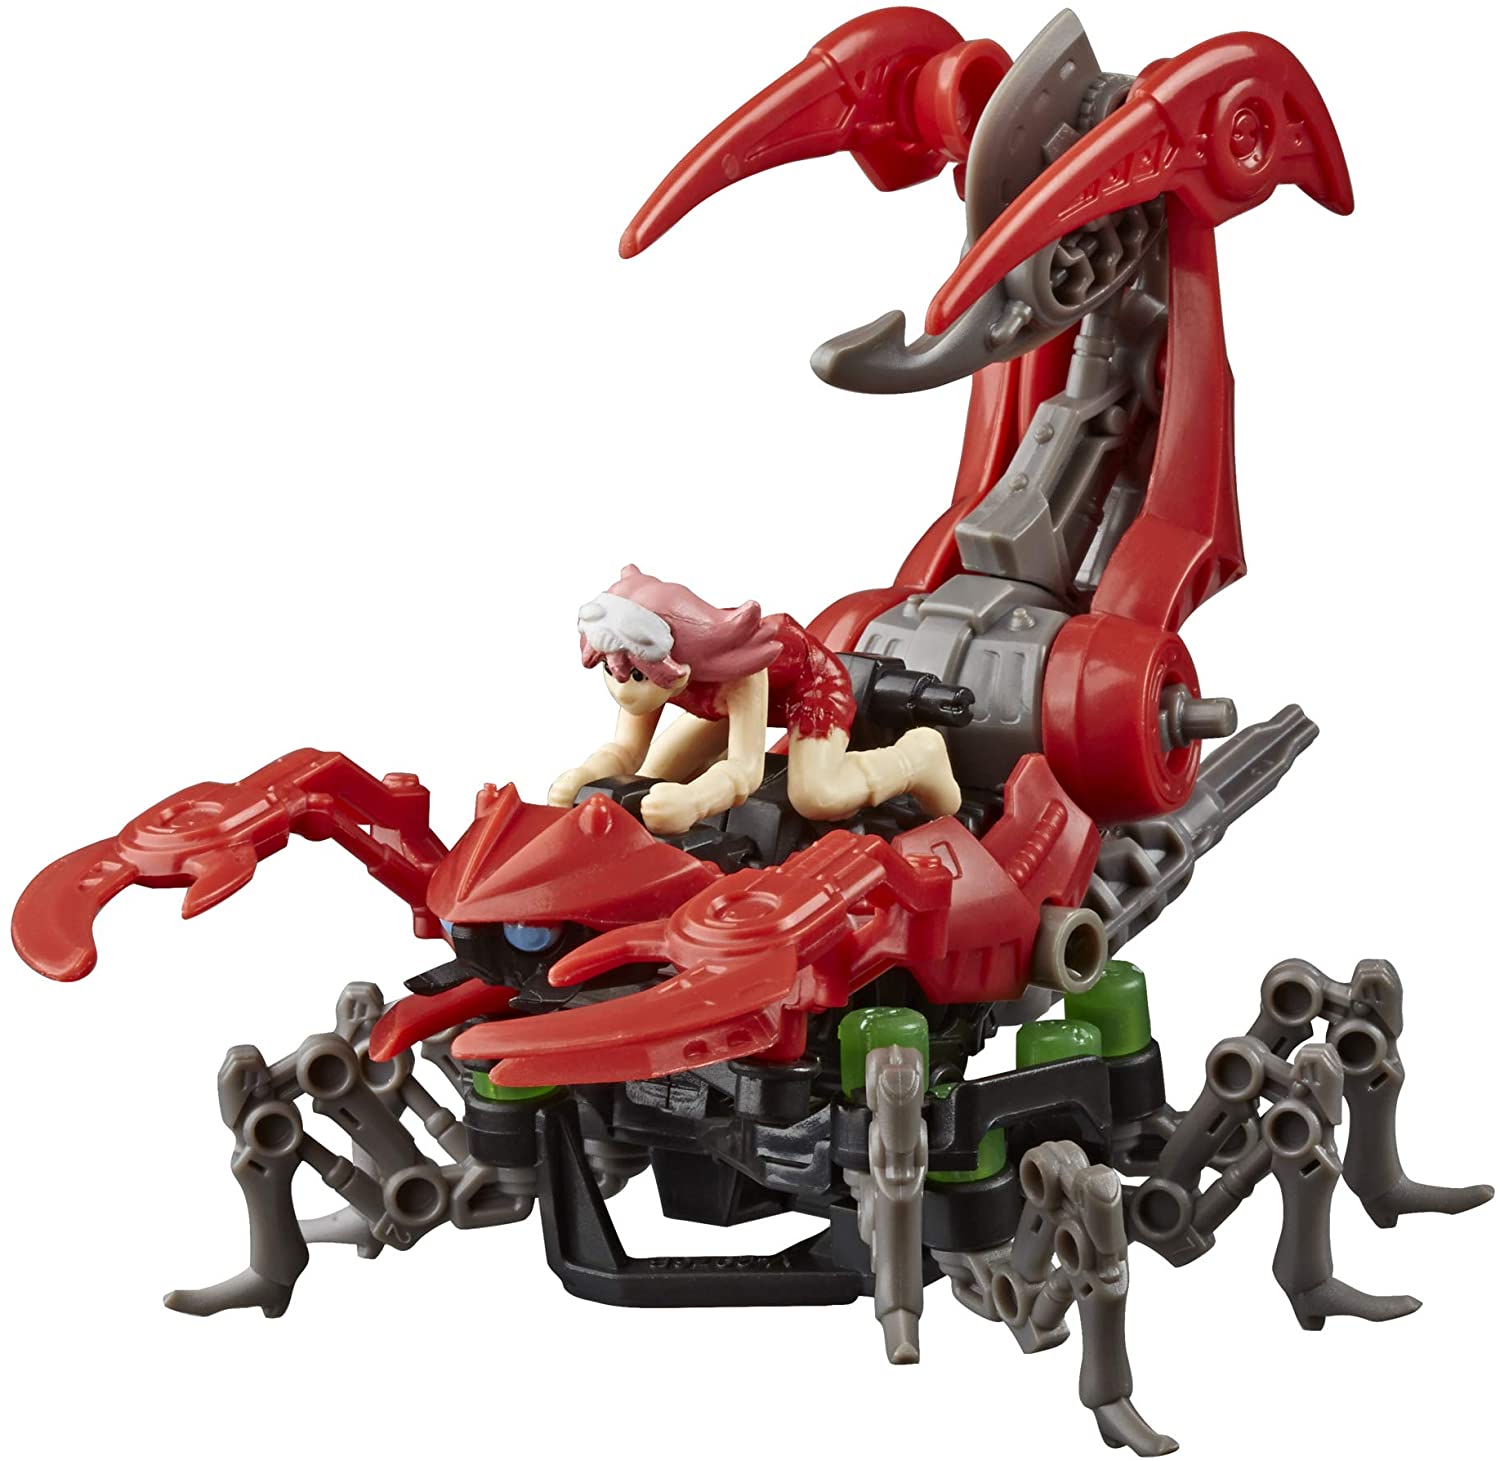 ZOIDS Hasbro Mega Battlers Needle - Scorpion-Type Buildable Beast Figure with Wind-Up Motion - Toys for Kids Ages 8 and Up, 33 Pieces